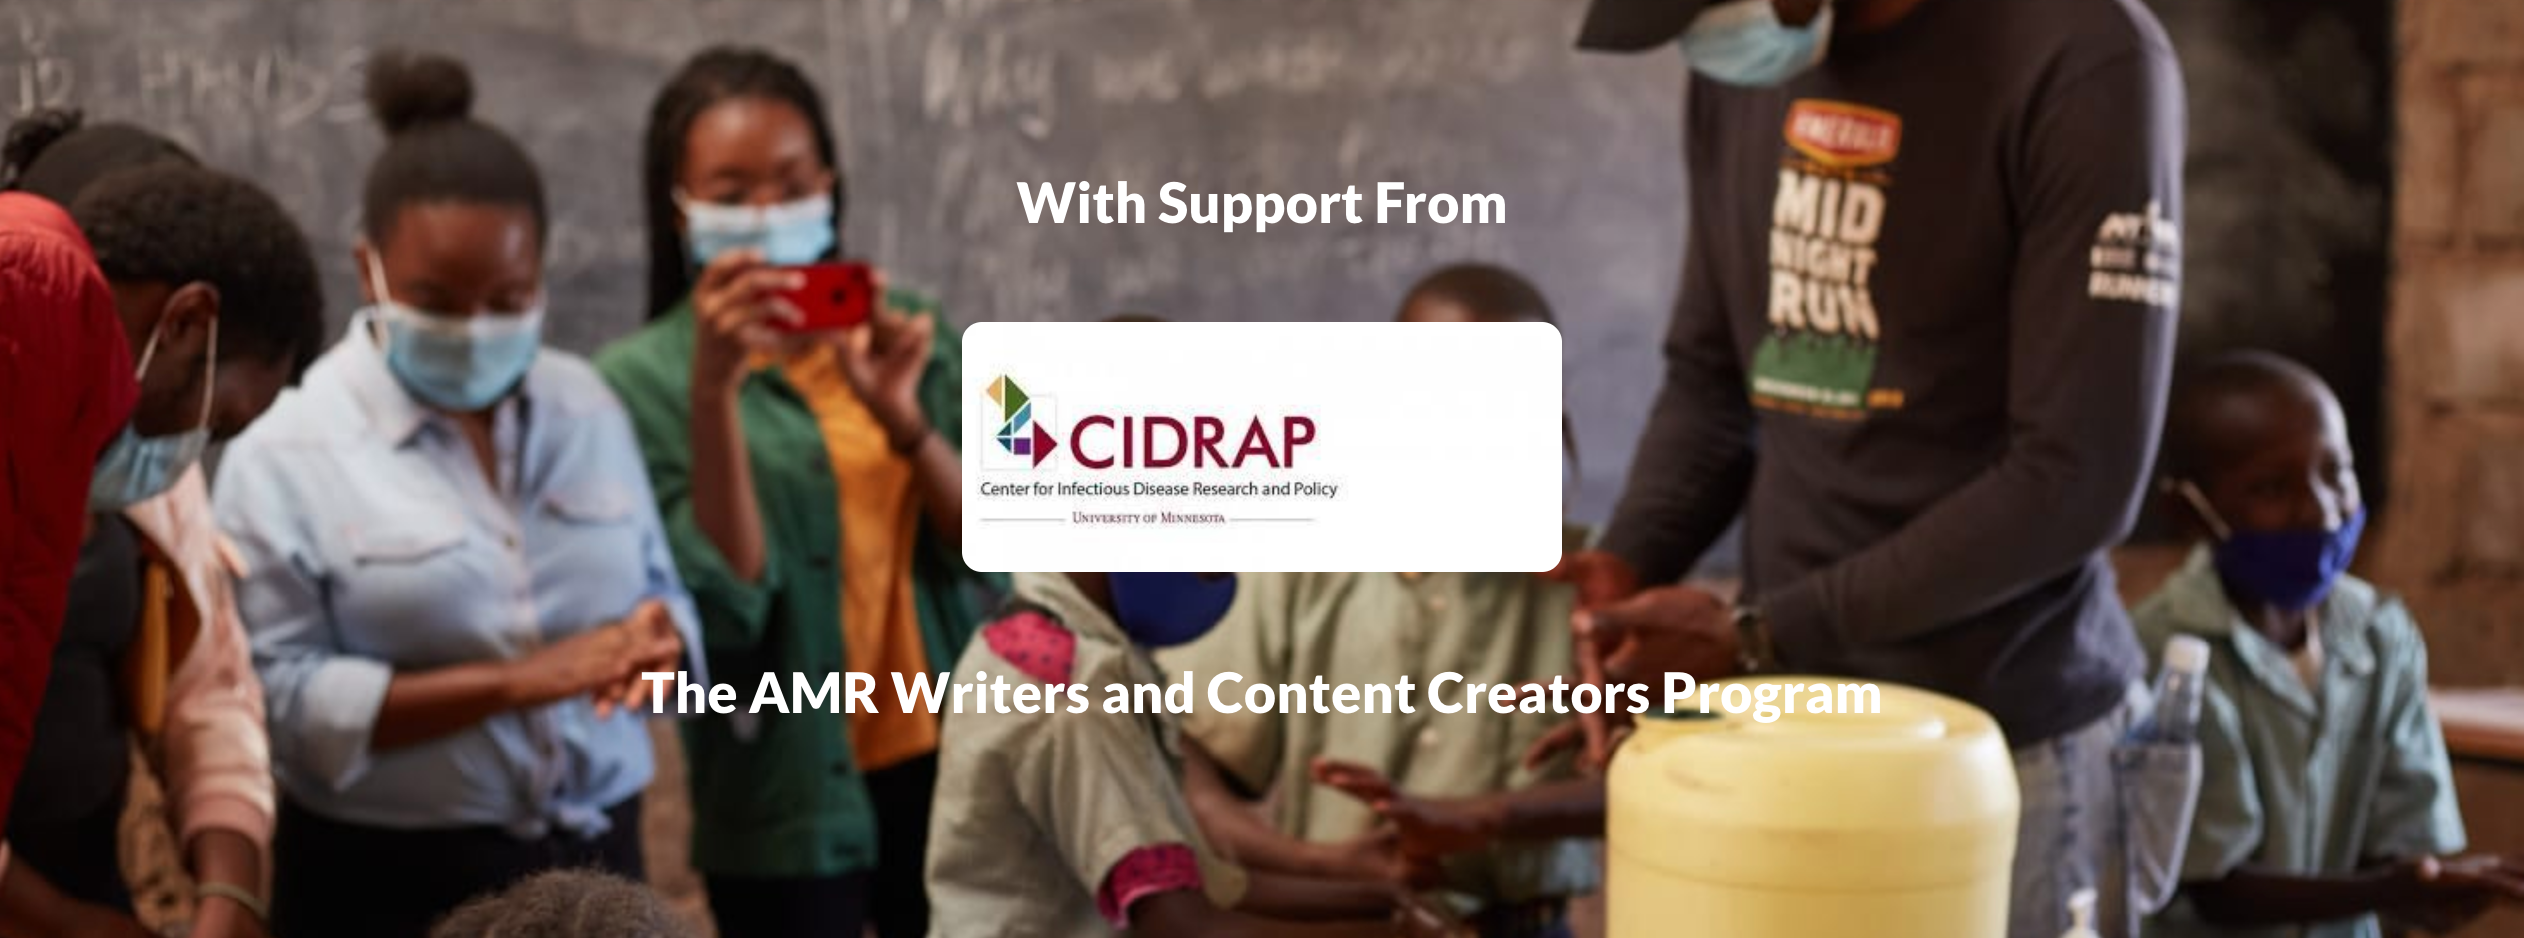 Eight people wearing medical masks stand in a circle and text reads "With support from CIDRAP: The AMR Writers and Content Creators Program"